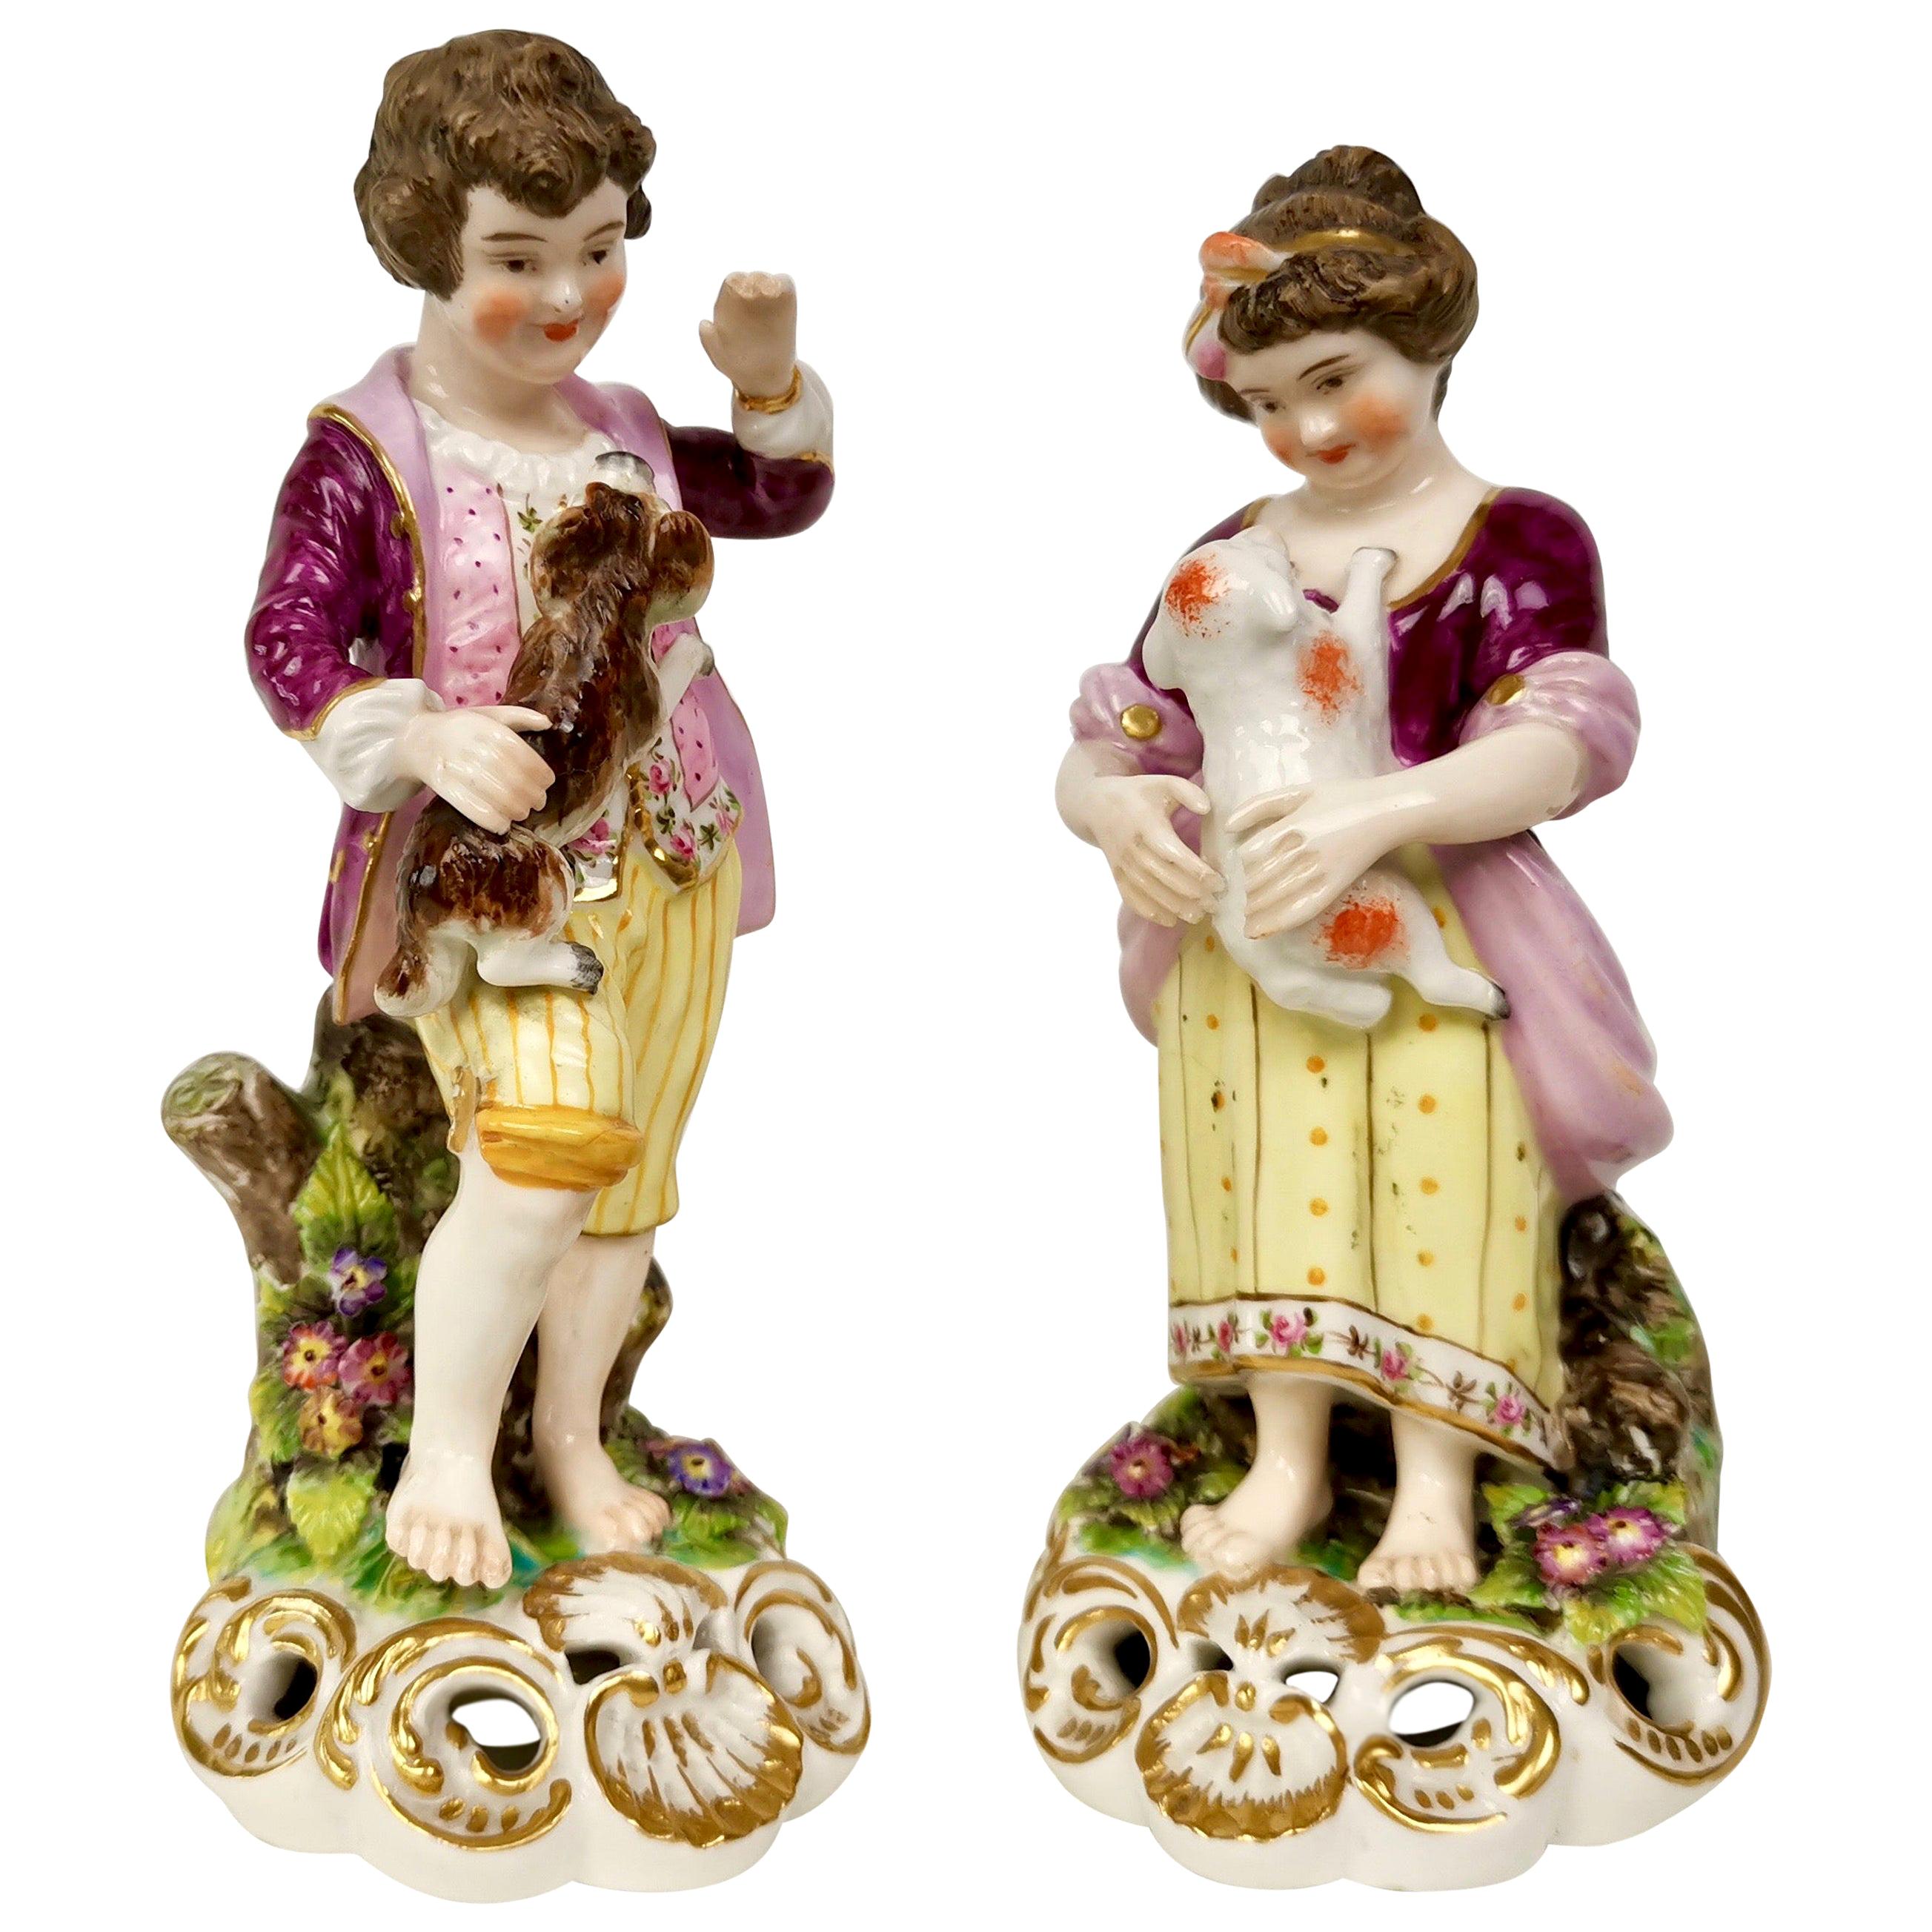 Derby King Street Porcelain Boy and Girl Playing with Dog and Lamb, circa 1915